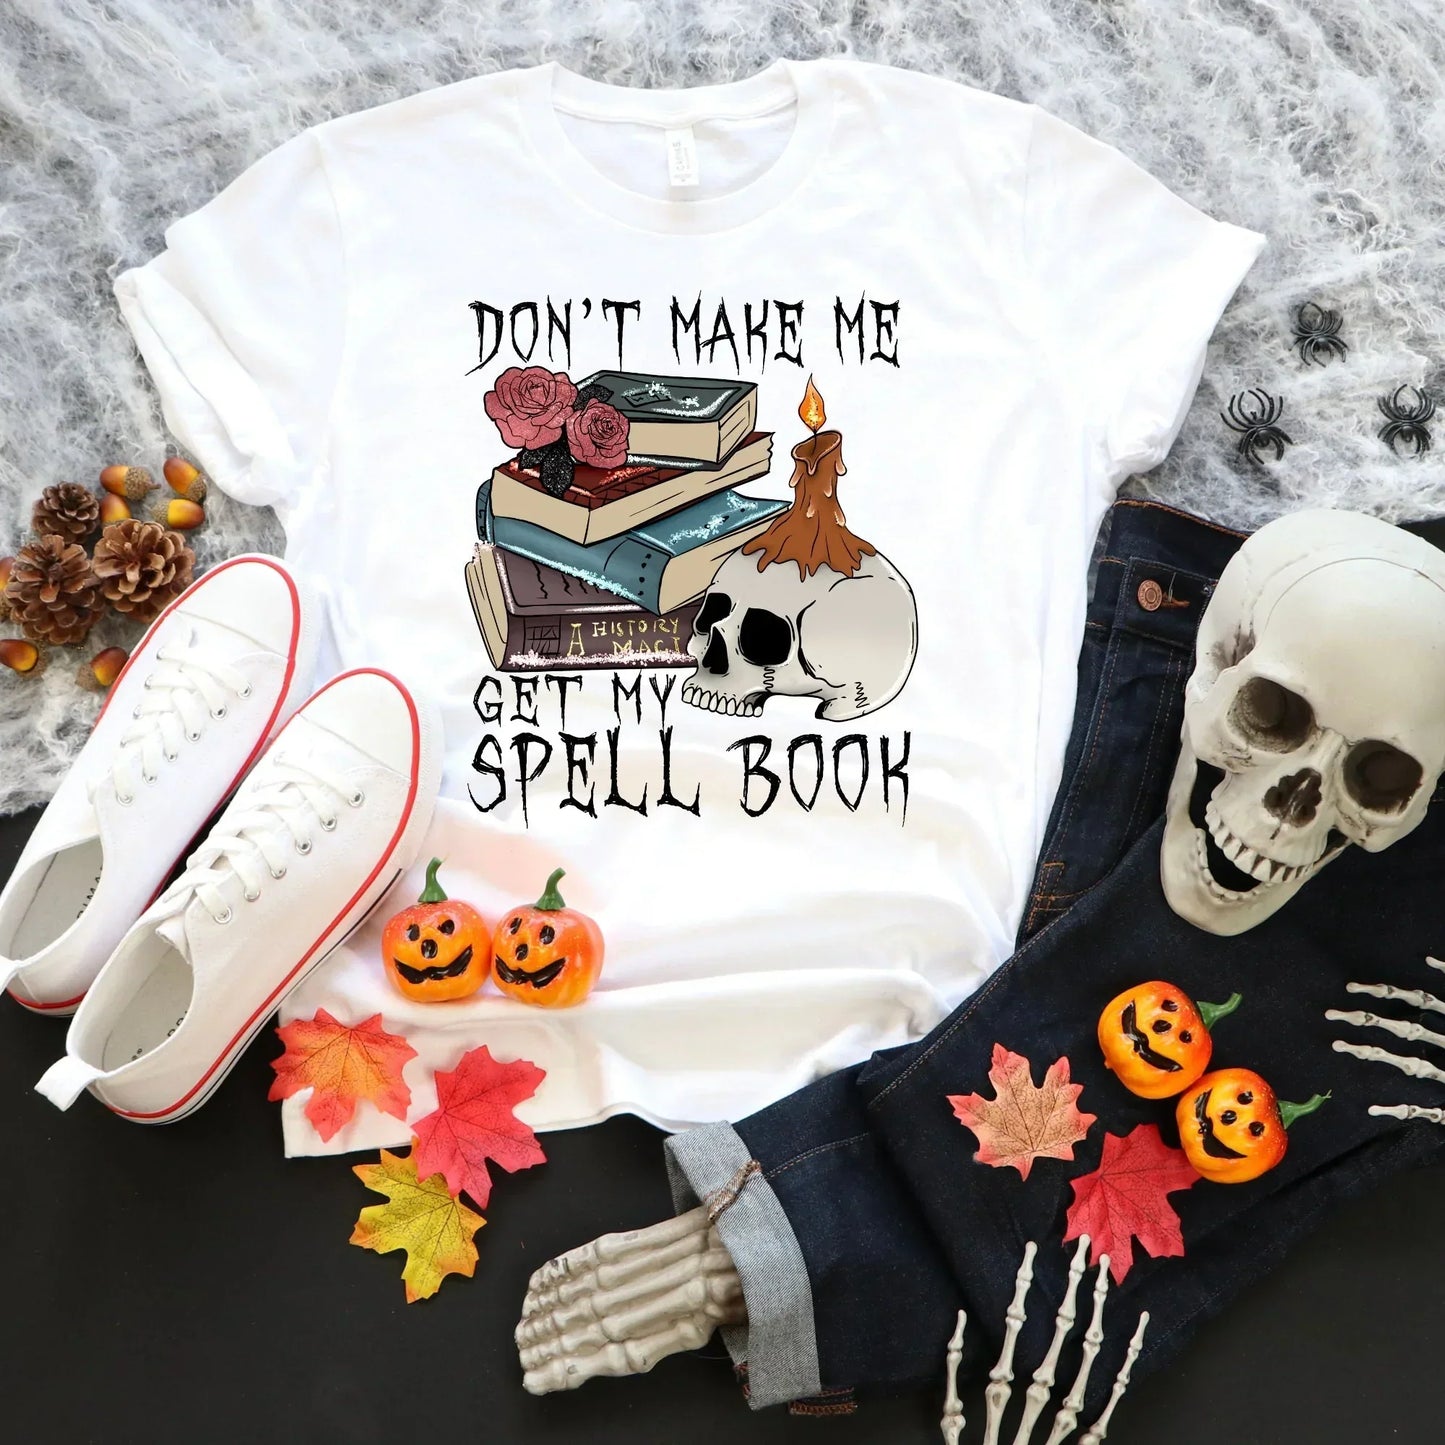 Pastel Halloween Gothic Shirt, Witchy Vibes, Halloween Sweatshirt, Skull Shirt, Pastel Goth Style Grunge Aesthetic Clothing, Witch Sweater